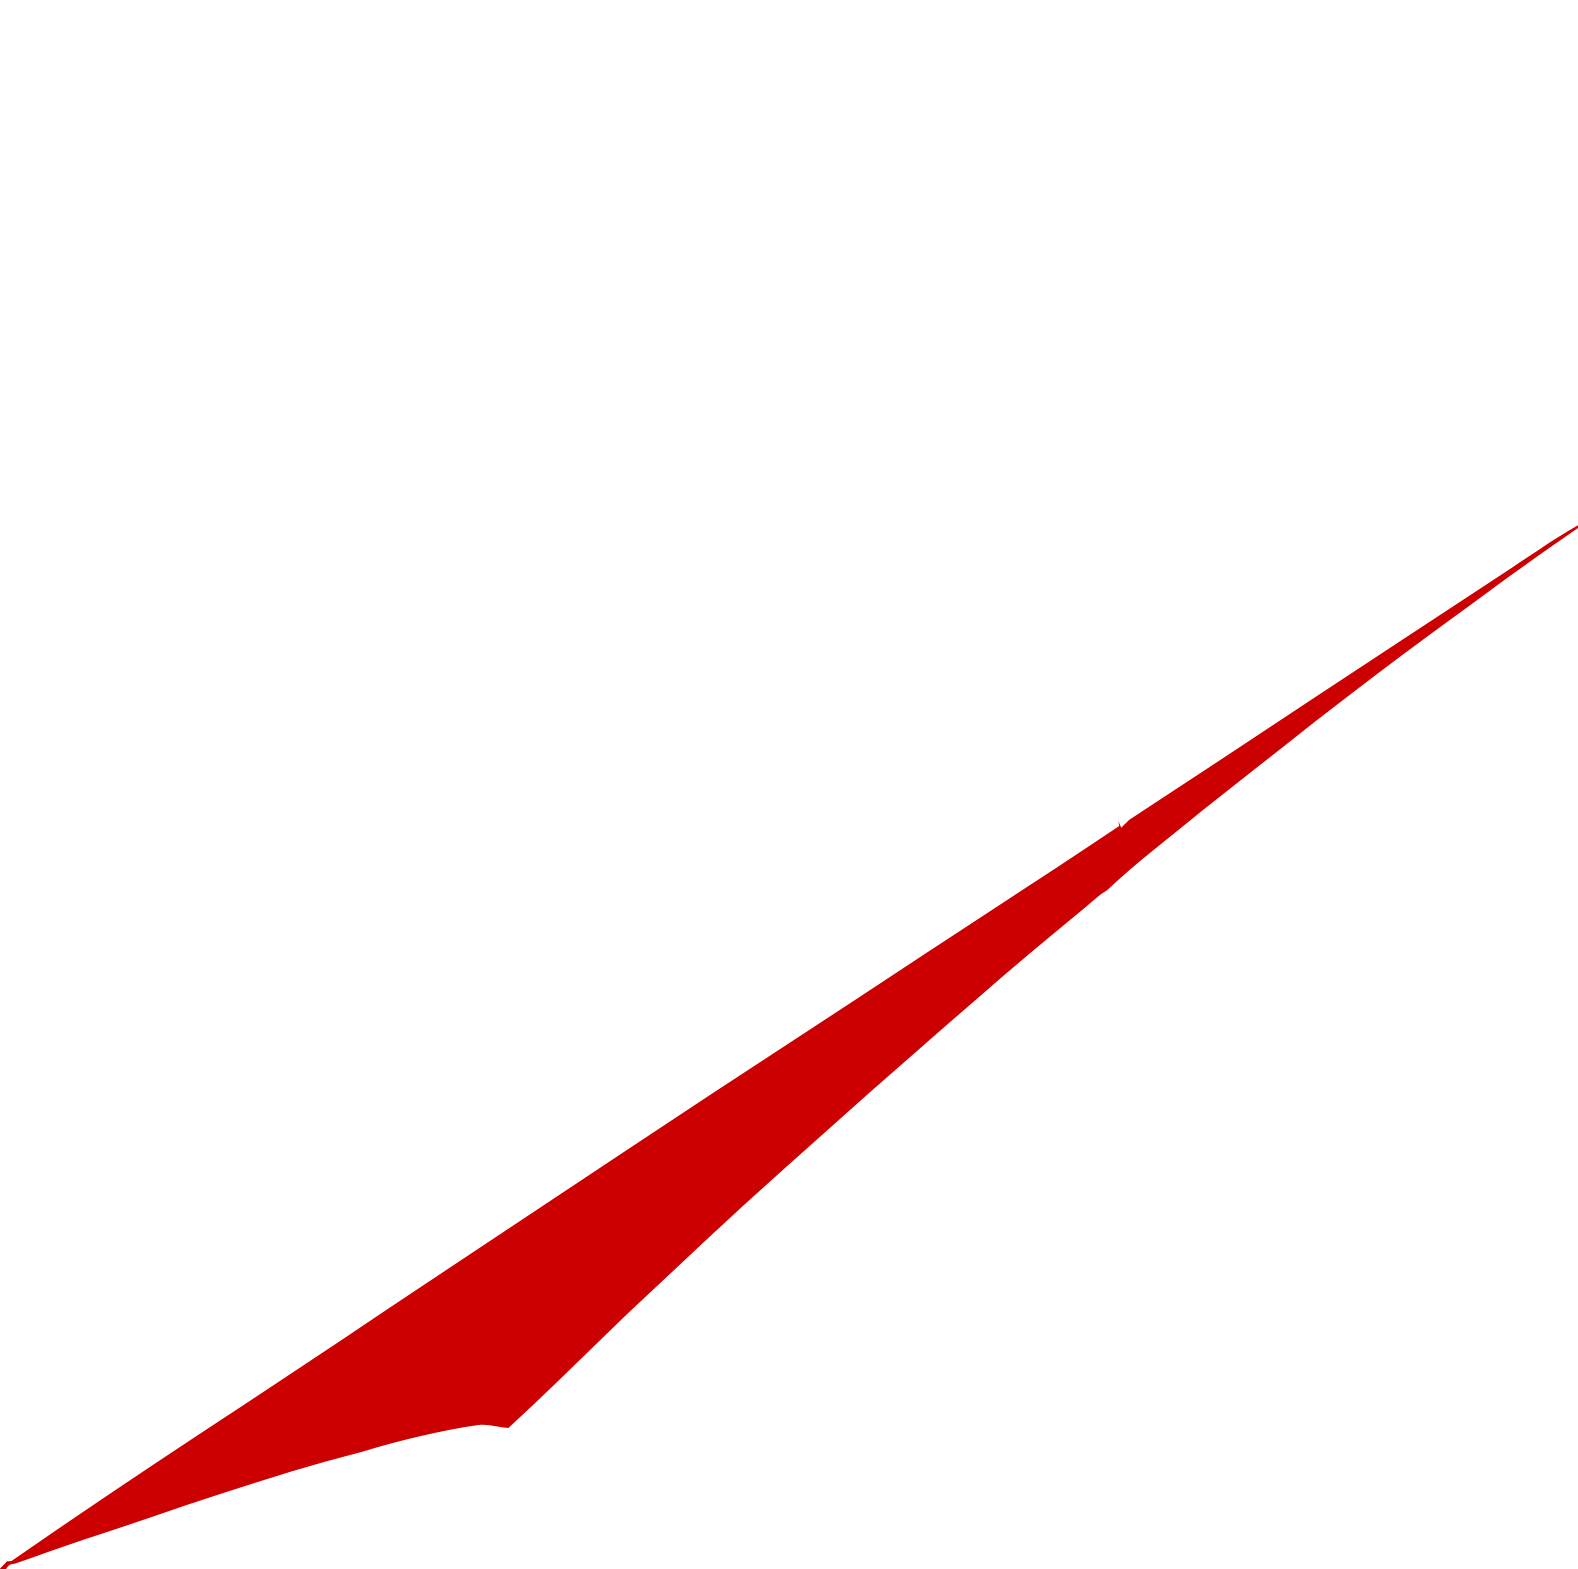 EnerSys logo in transparent PNG and vectorized SVG formats